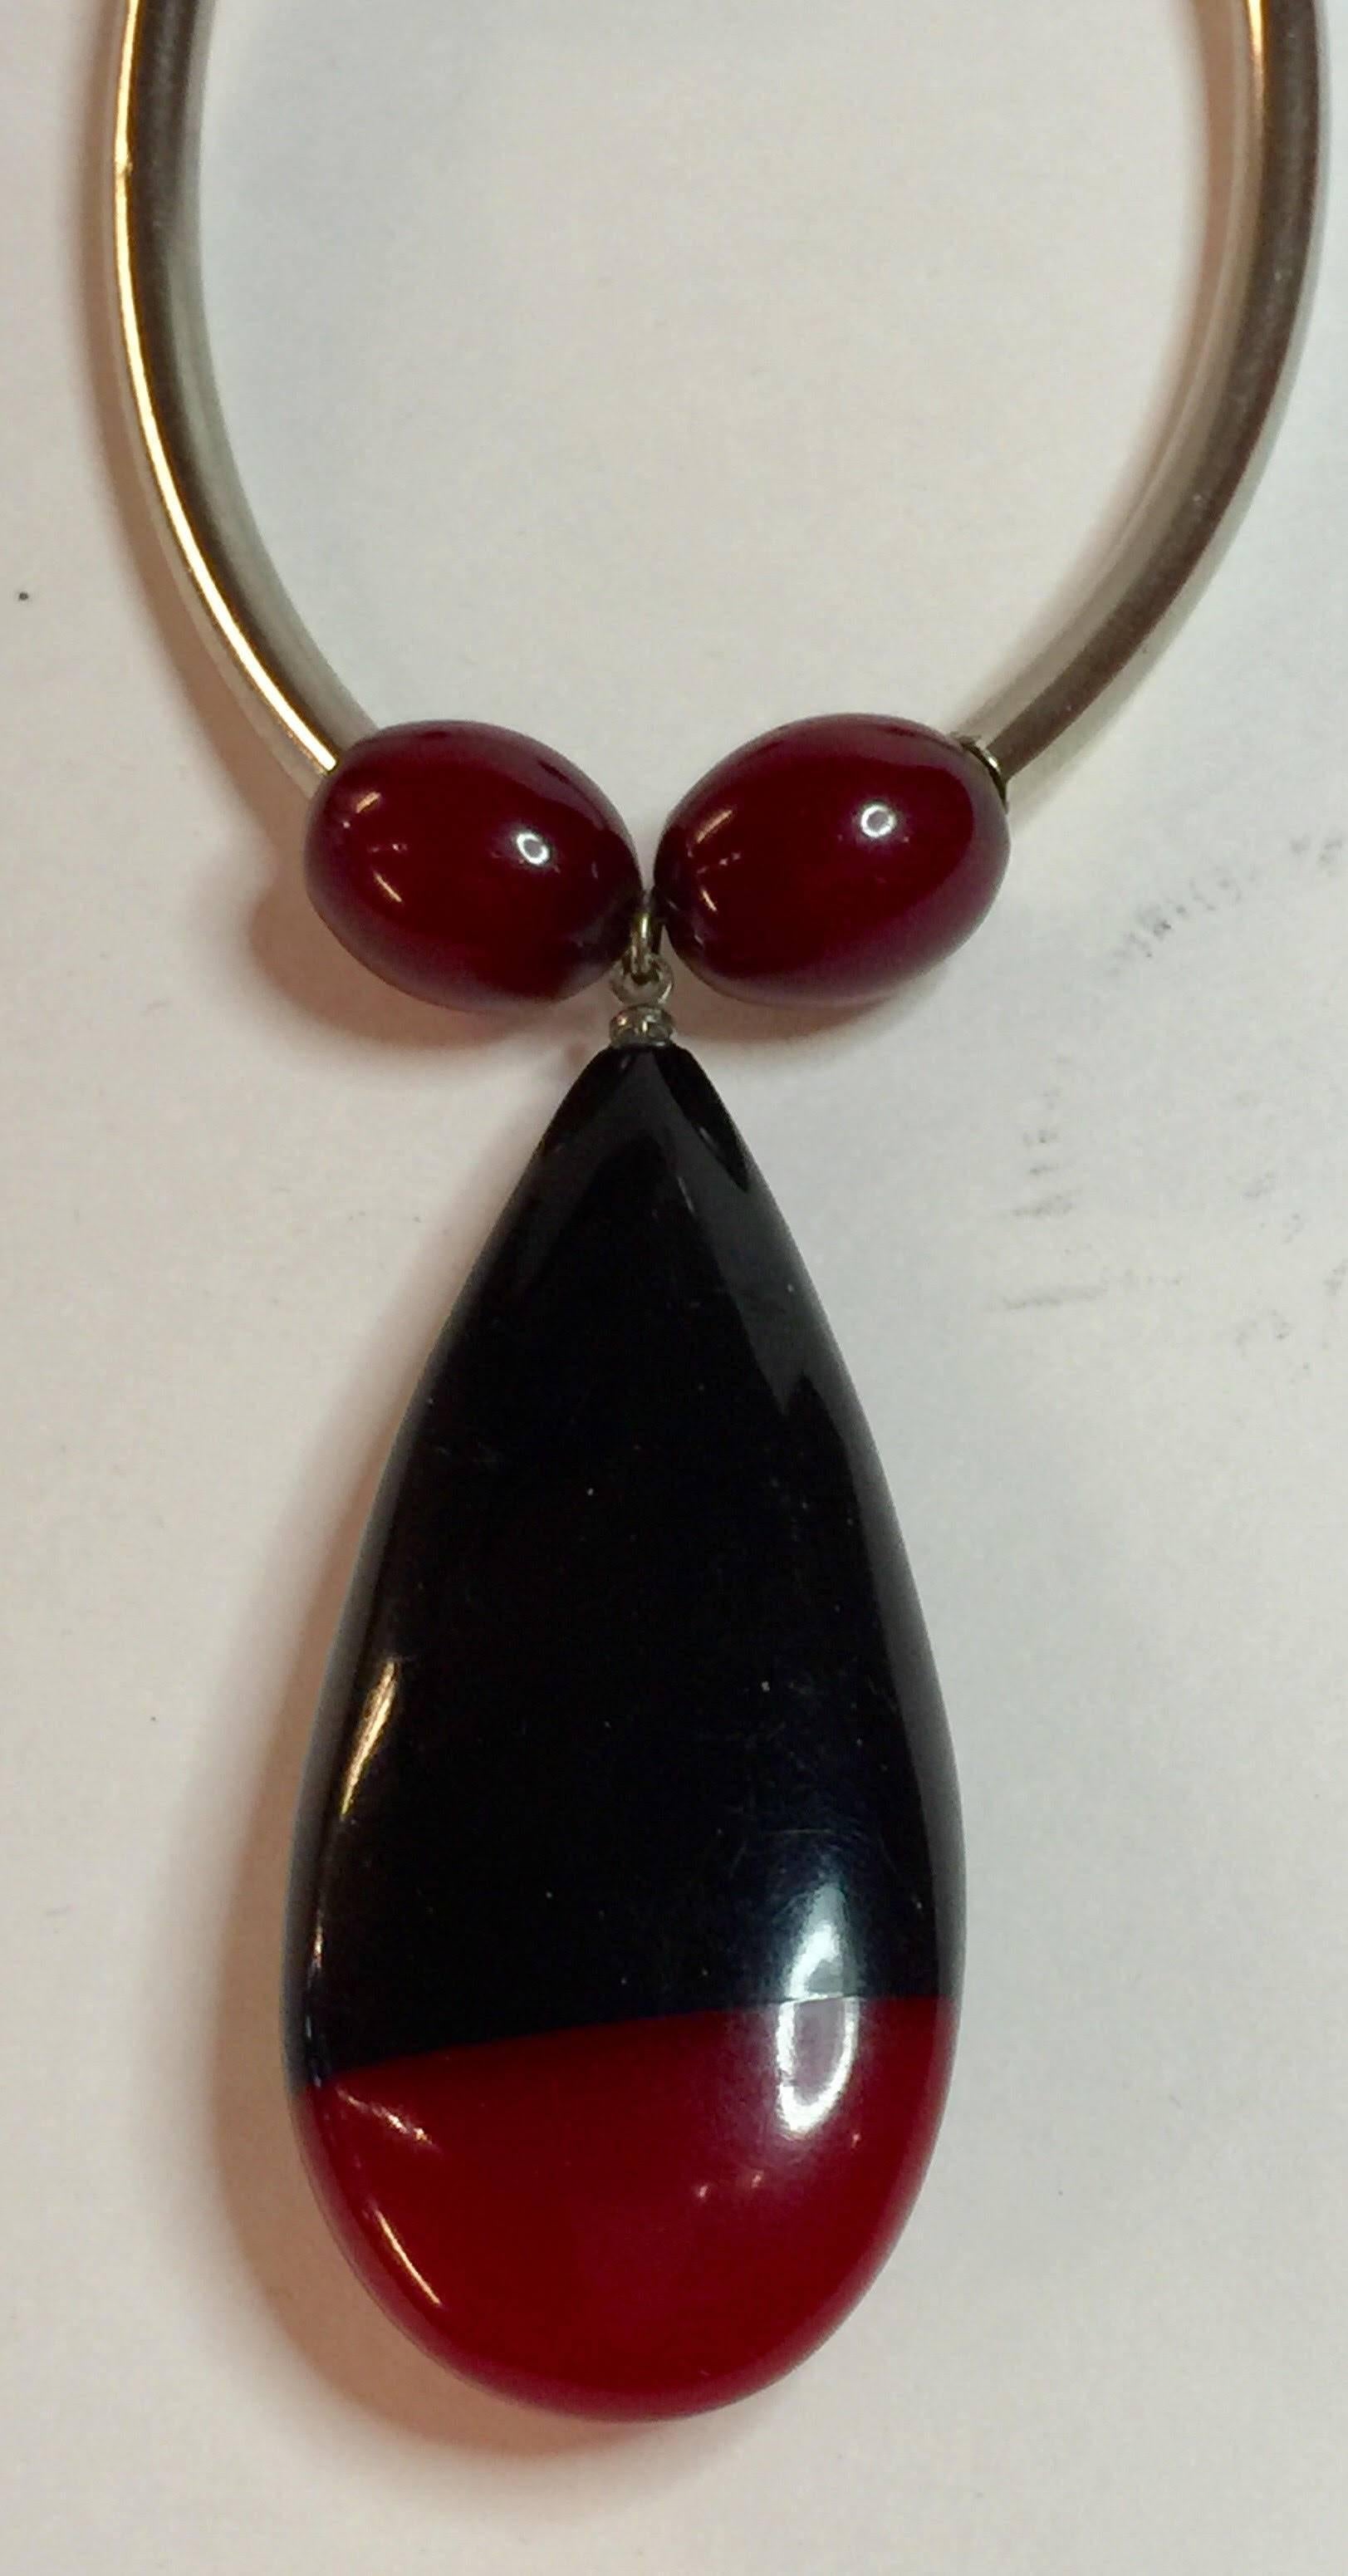 Women's 1930s Art Deco German Red Black Galalith Chrome Necklace Jacob Bengel For Sale